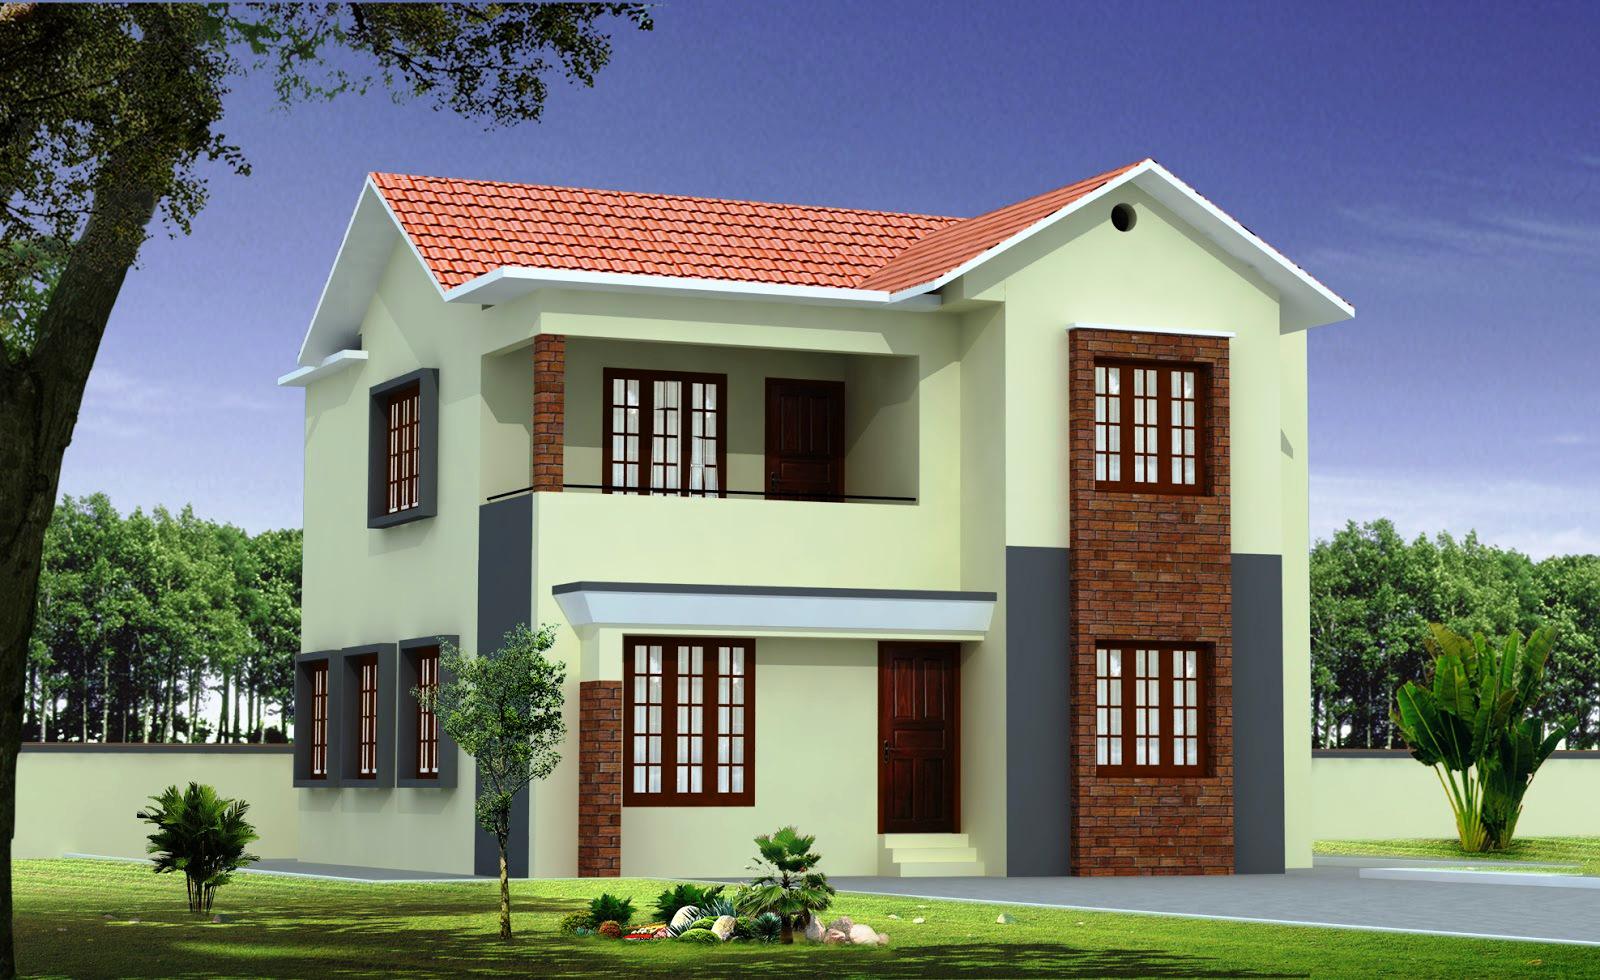 House Designs And Ideas